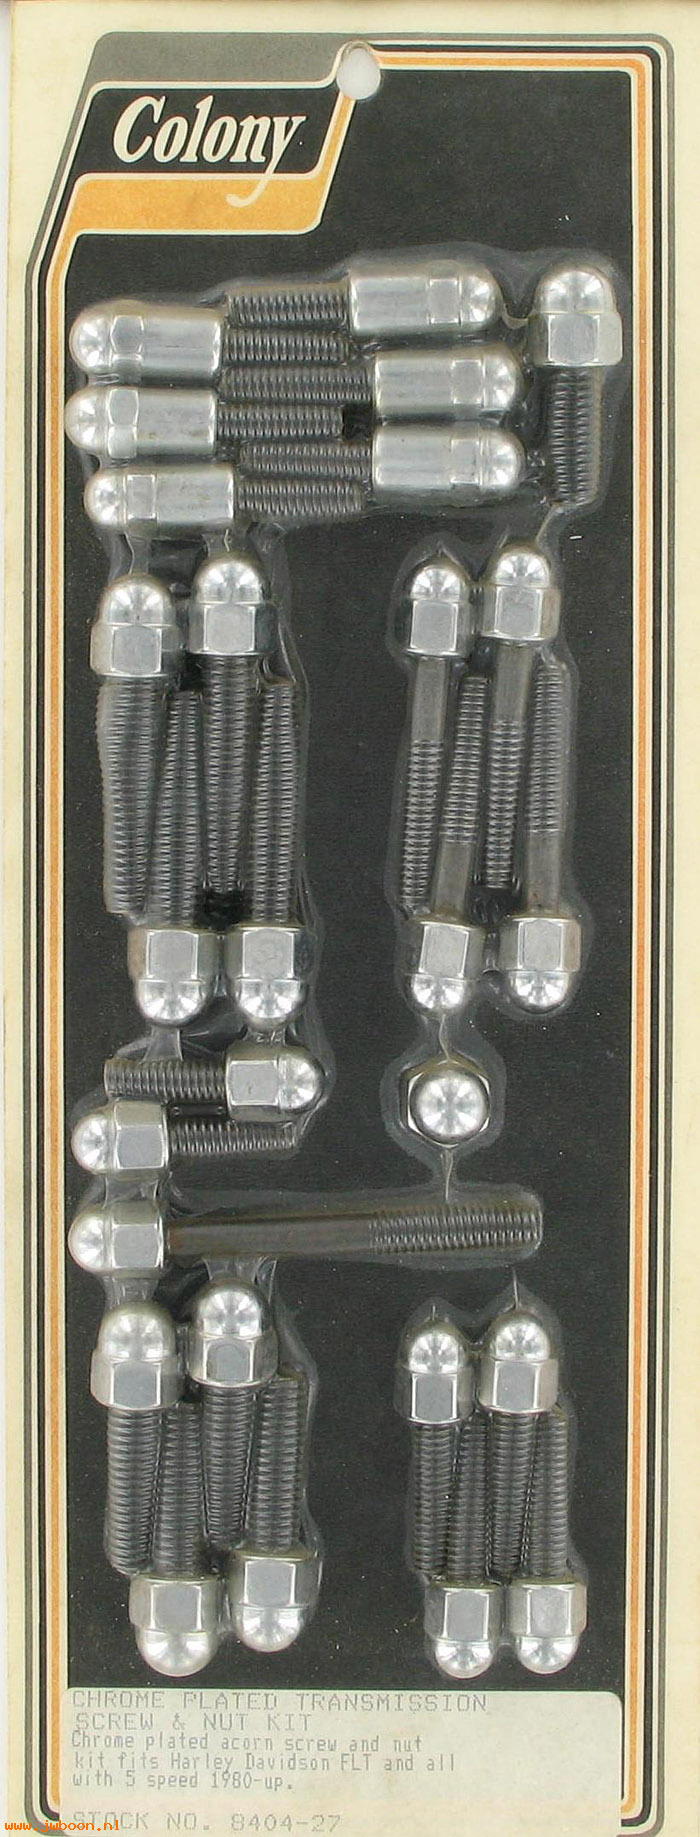 C 8404-27 (): Transmission screw & nut kit - FLT '80-'85, and 5-speed, in stock